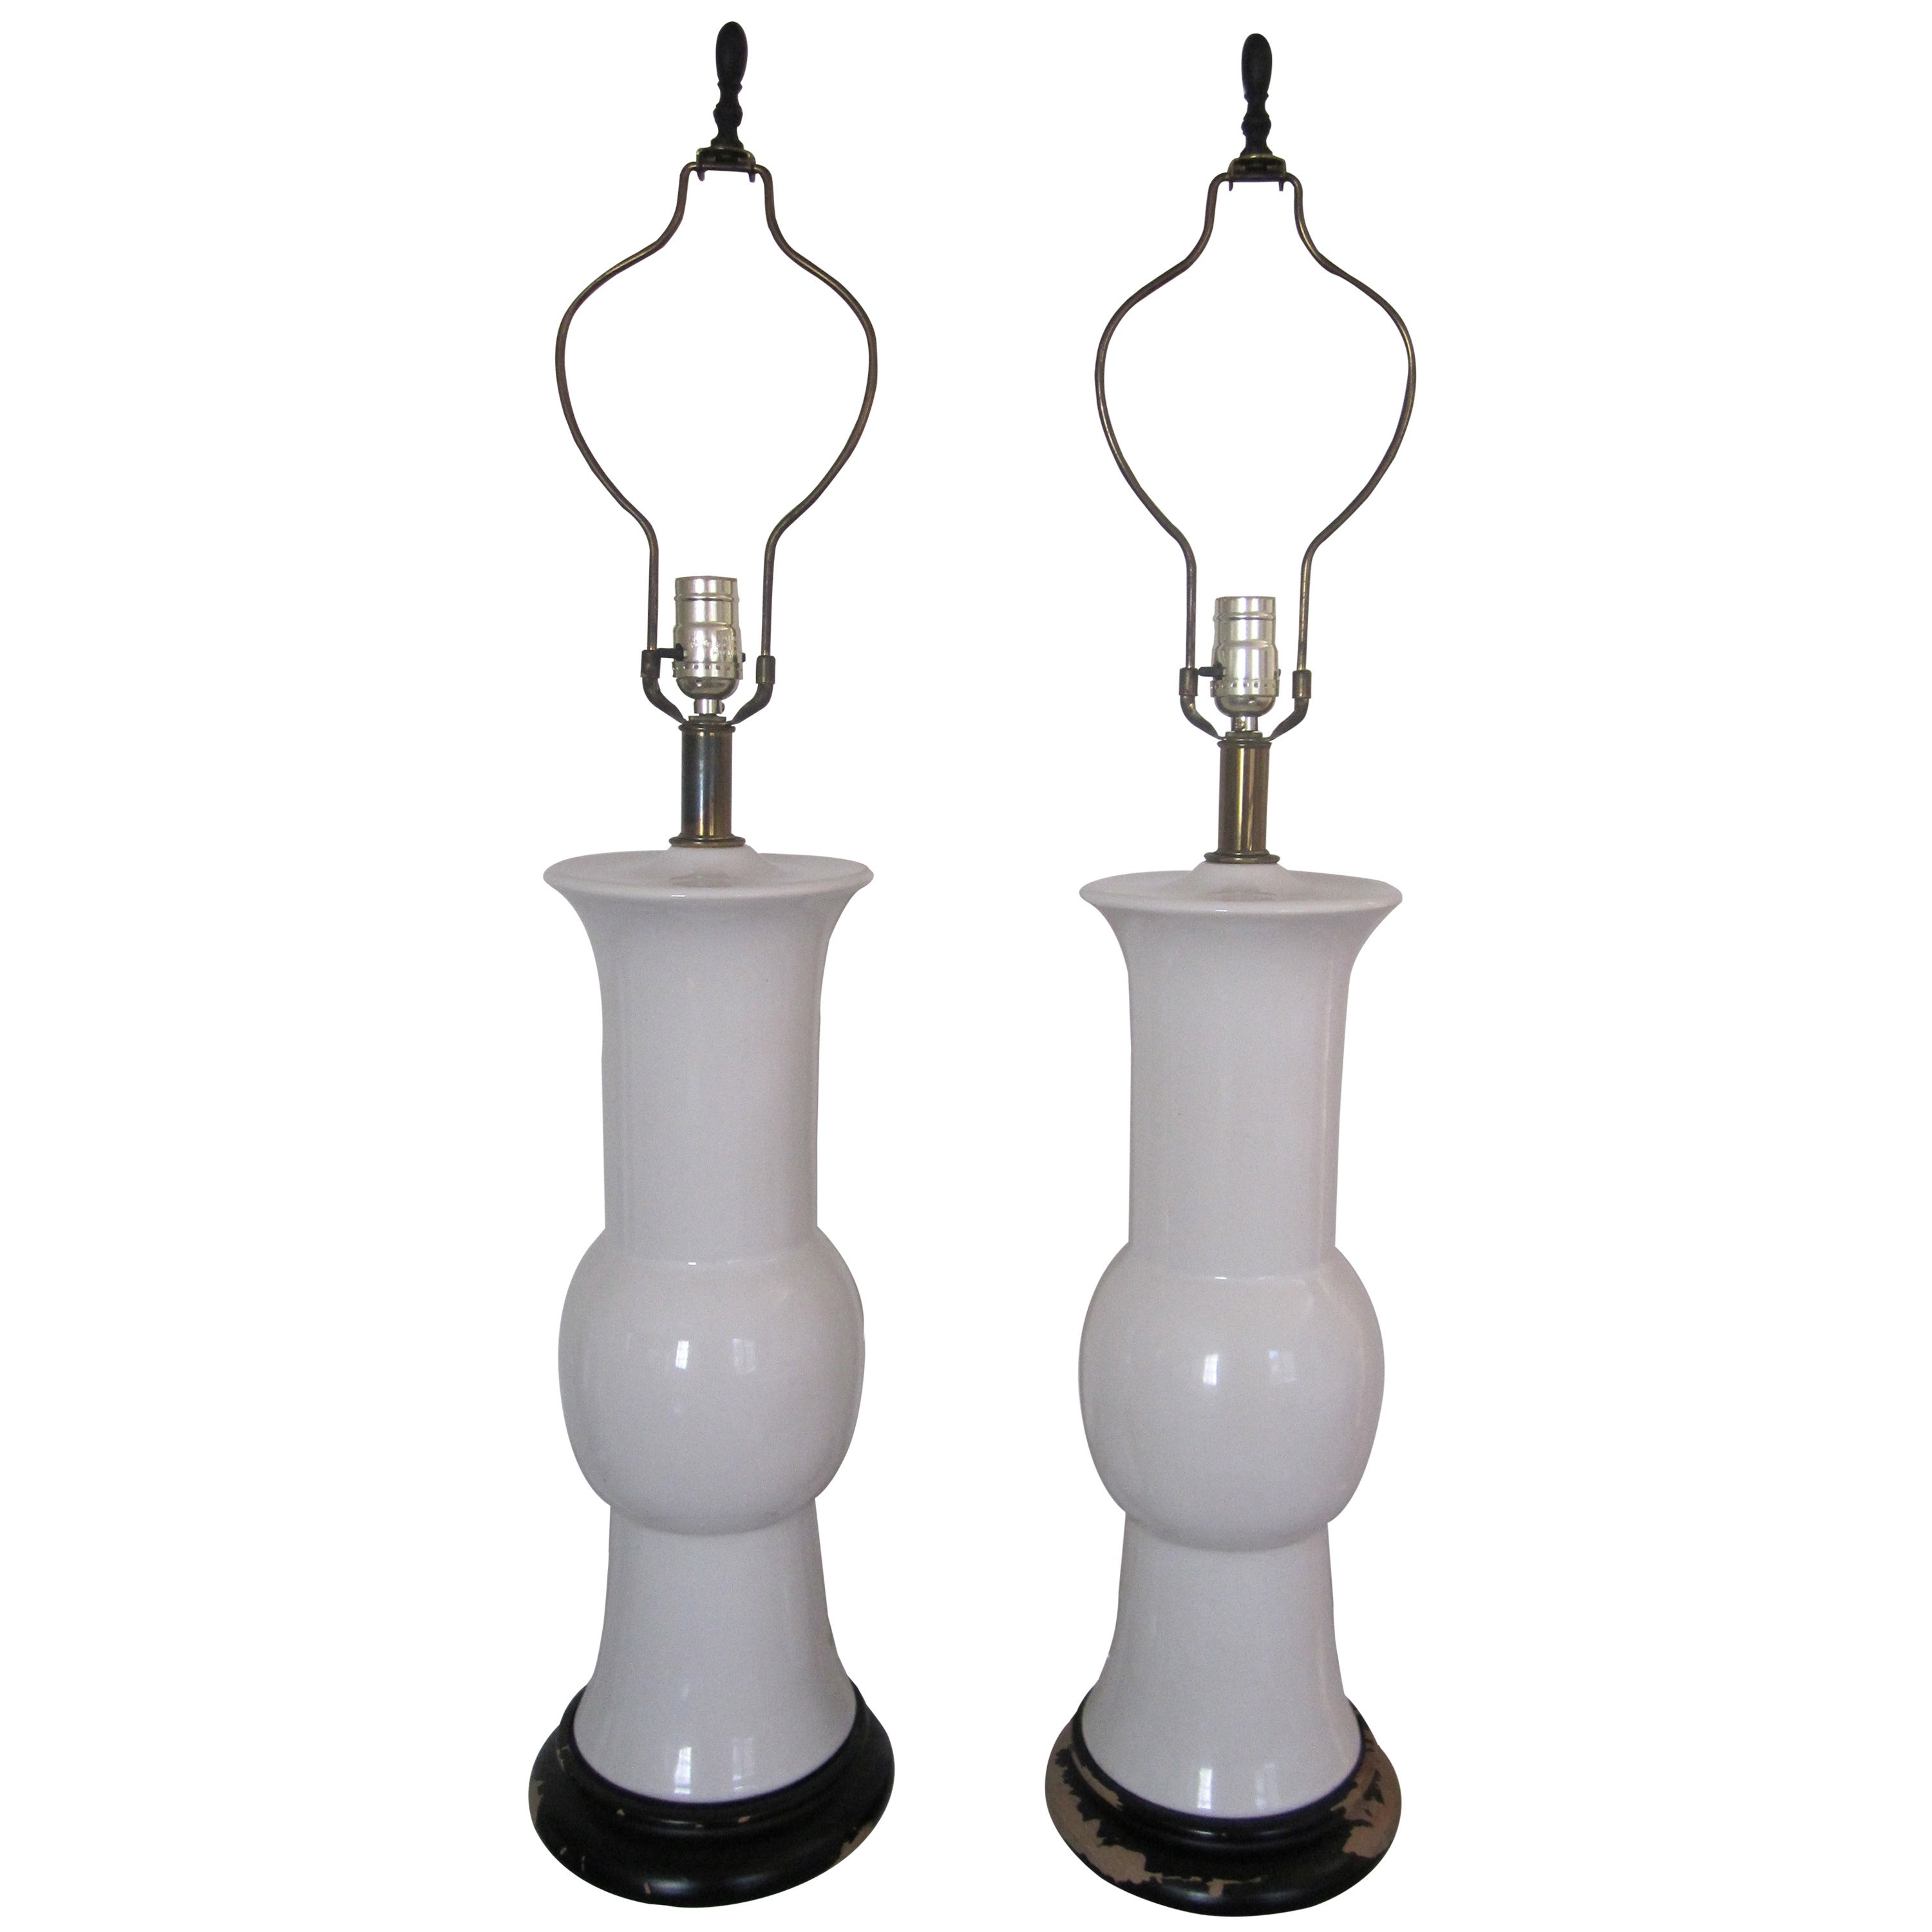 Tall Black and White Blanc-de-Chine Table Lamps in the Style of James Mont